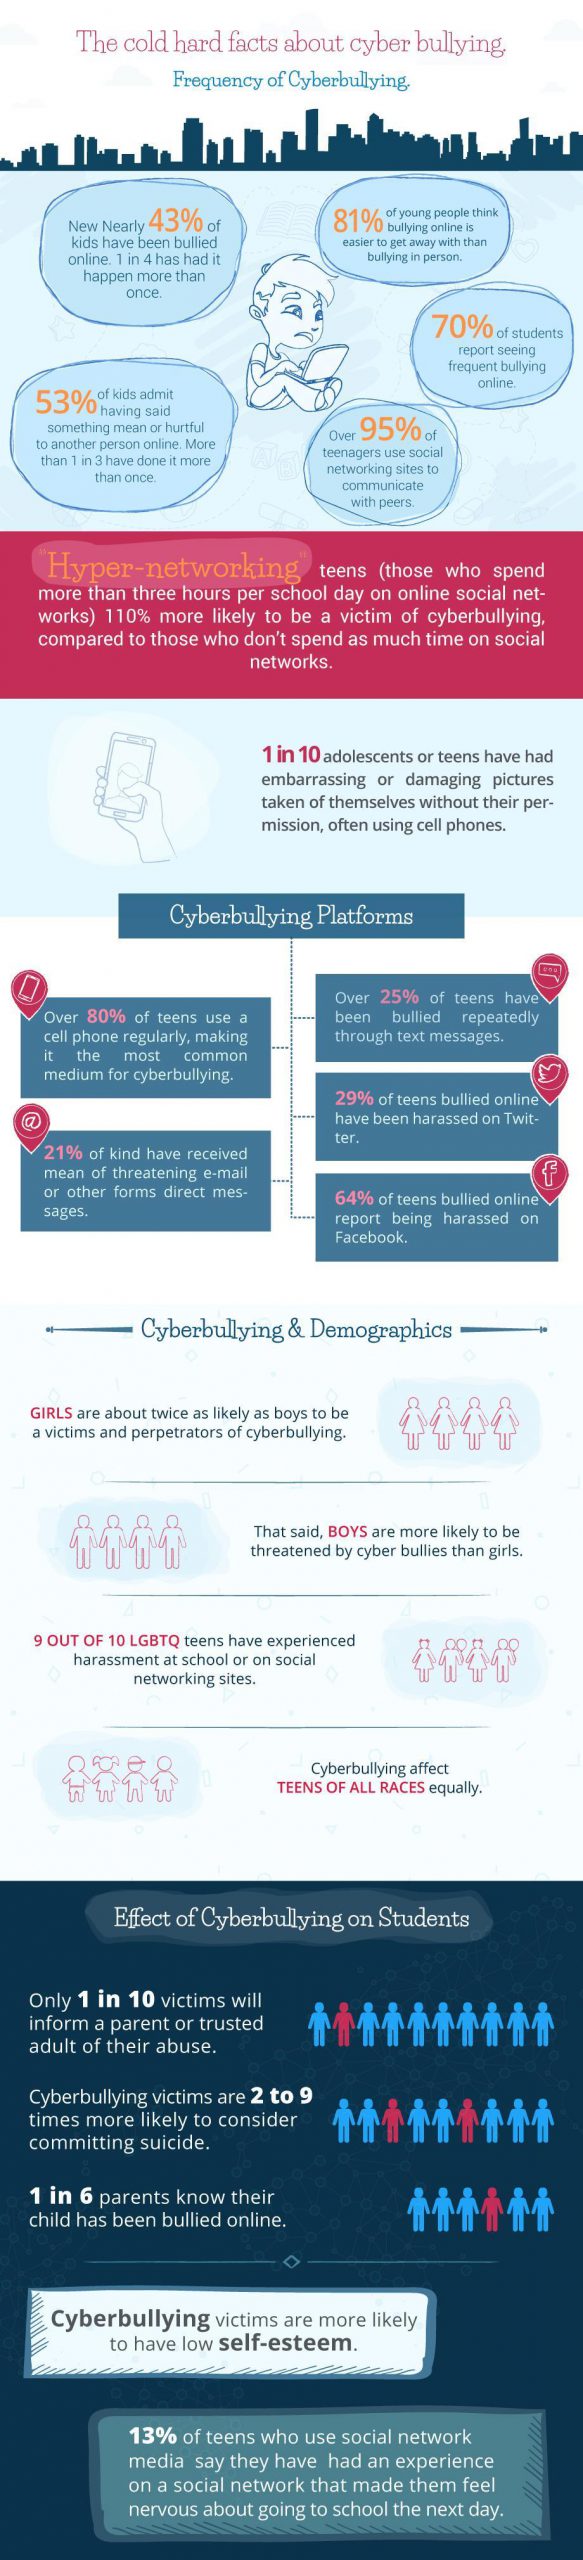 Useful Information about Cyberbullying